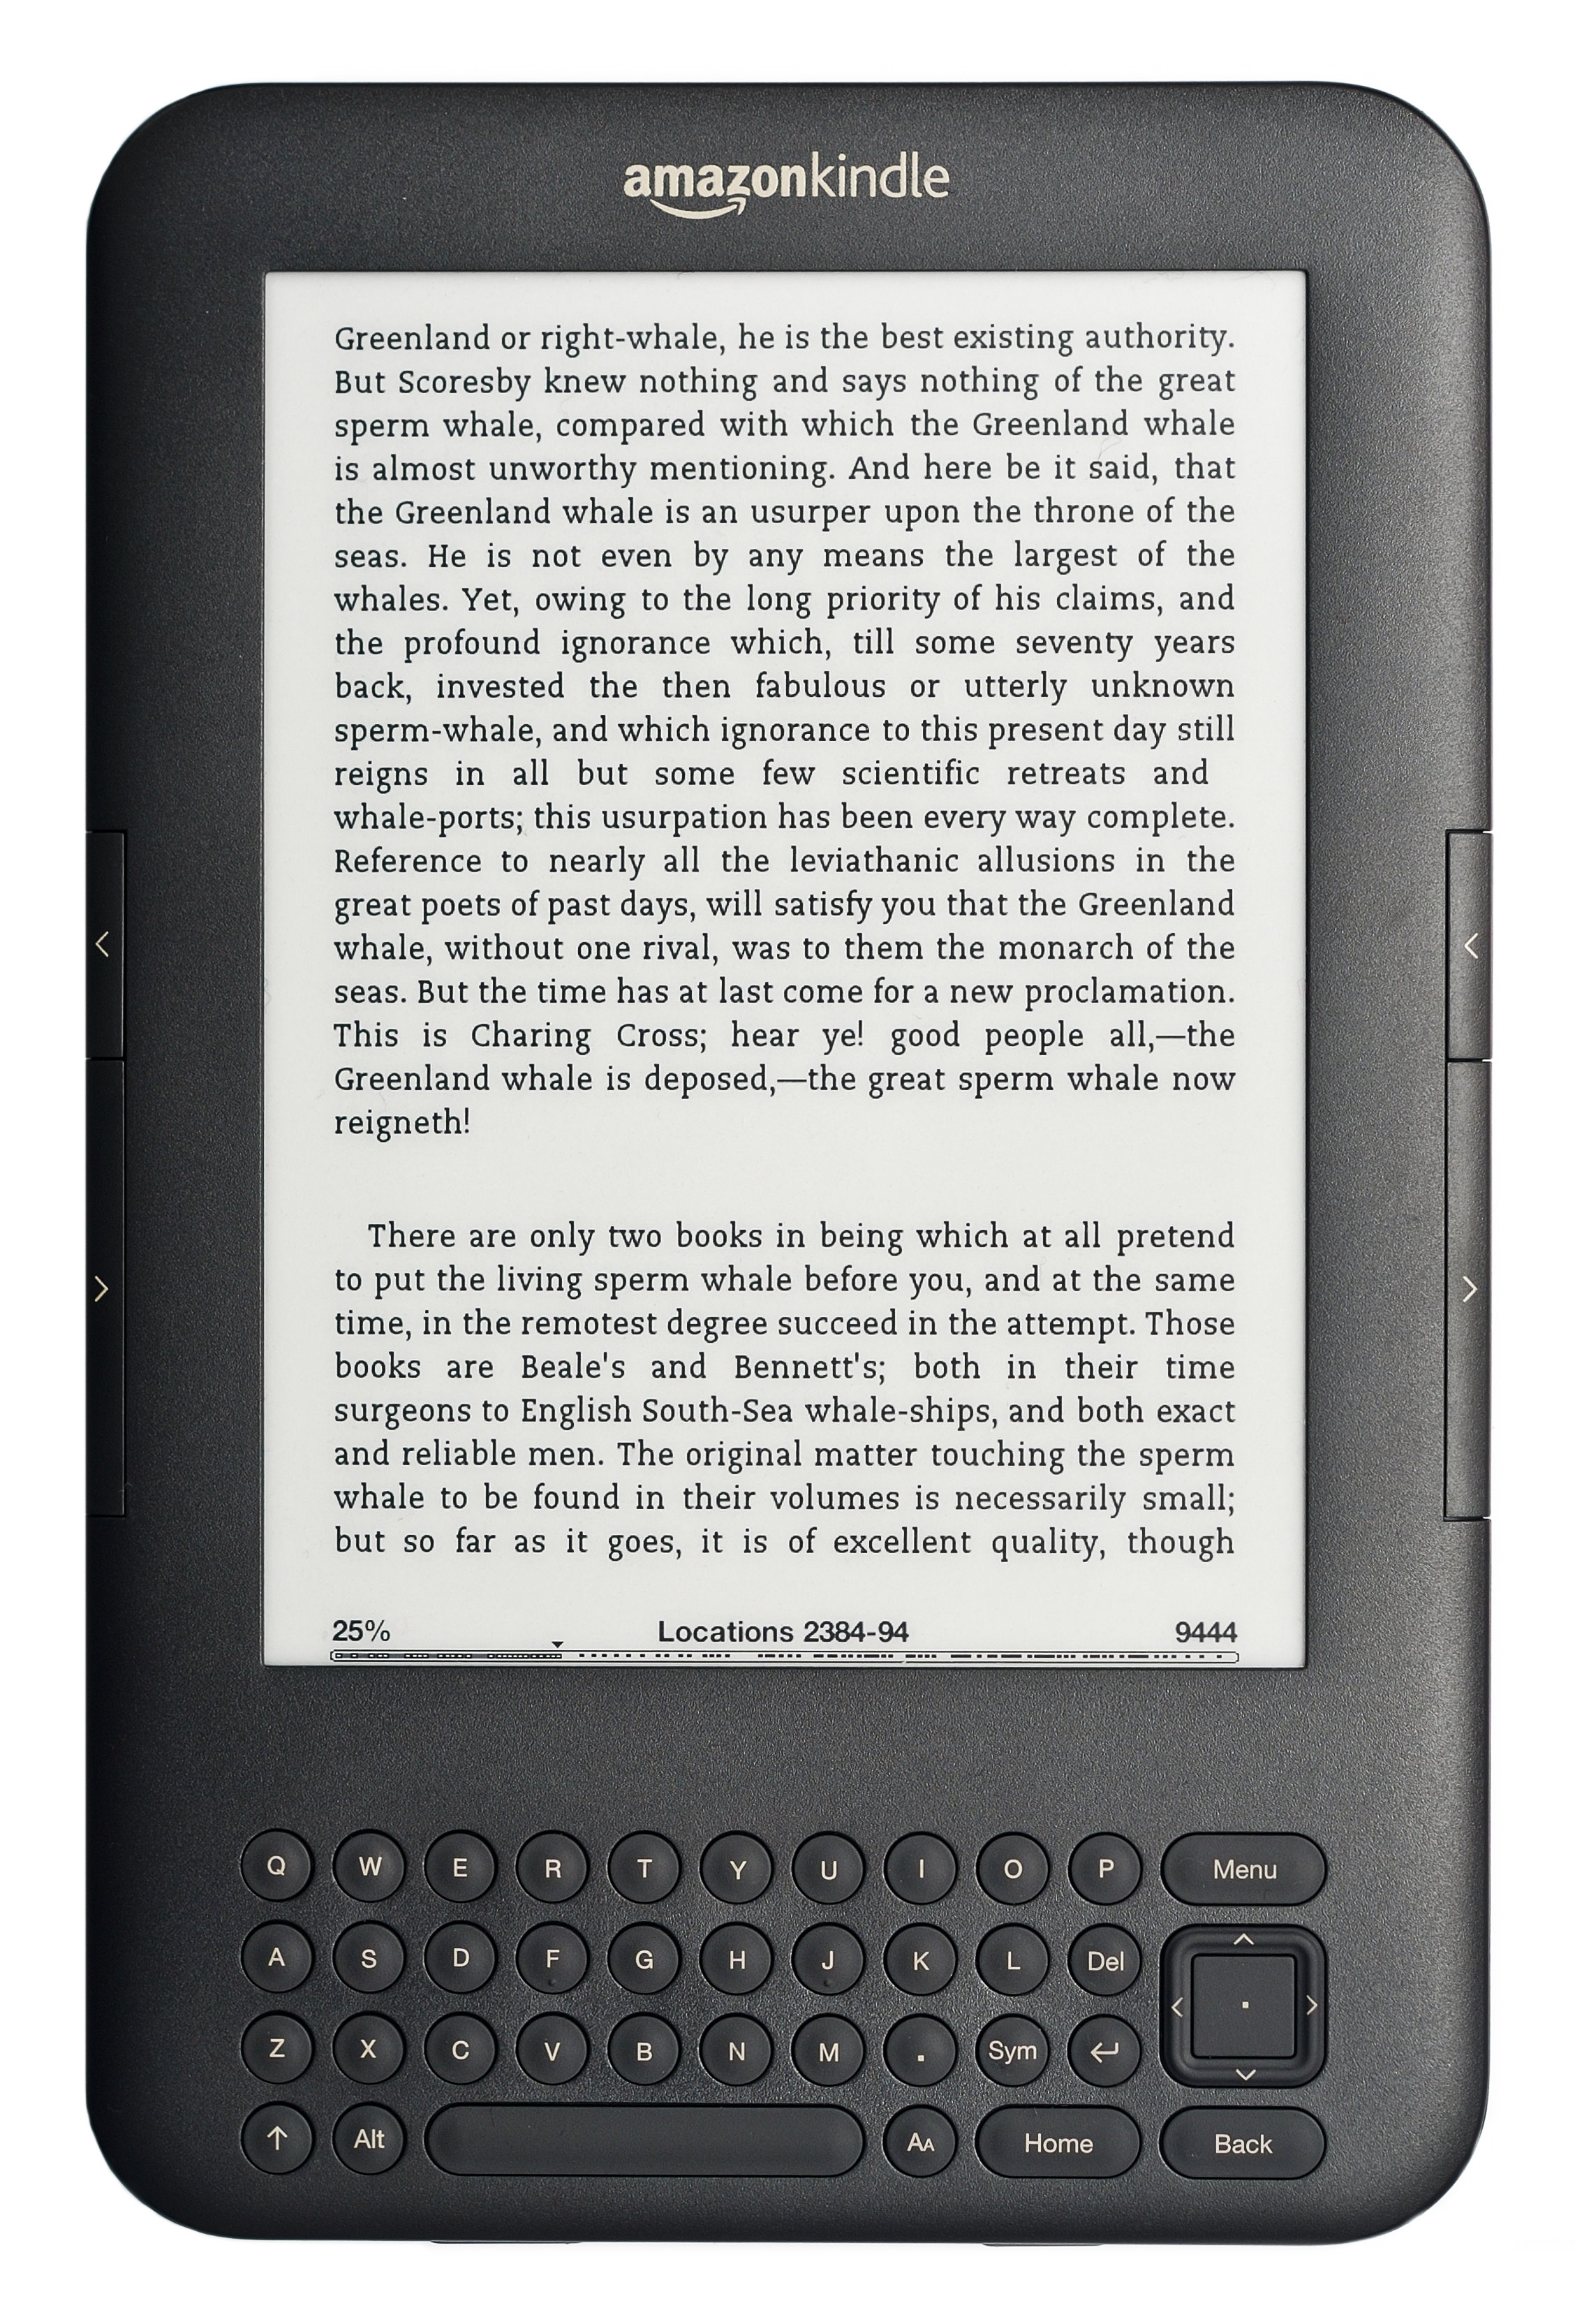 Third generation Amazon Kindle, showing text from the eBook version of the novel Moby Dick